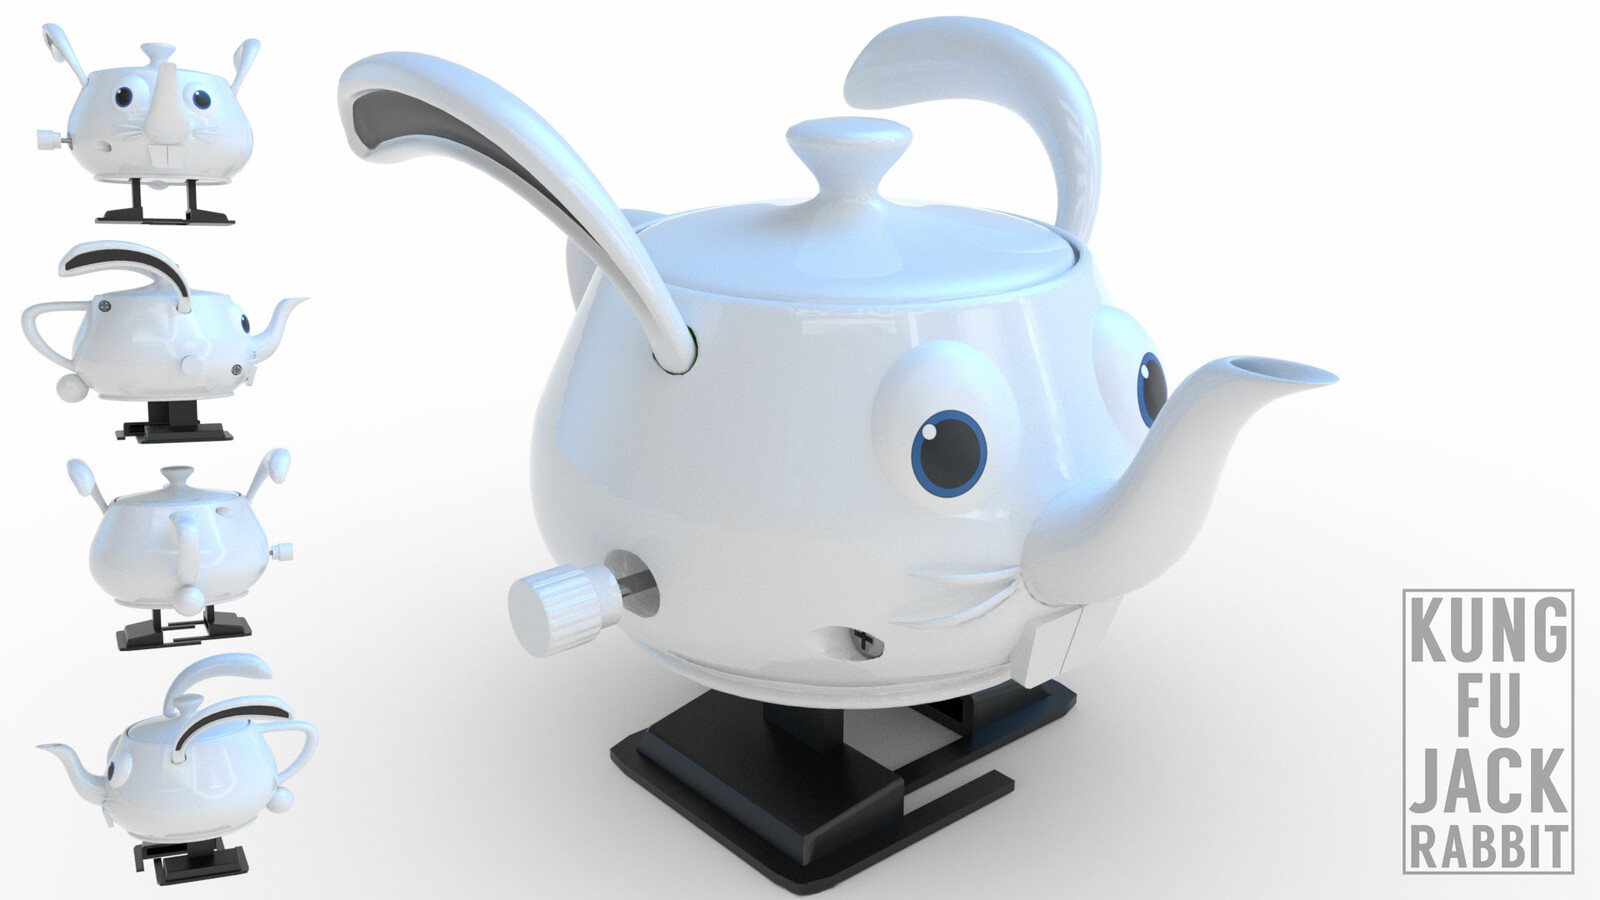 Pixar -ish tribute. I have a small collection of the Pixar teapots you get at siggraph and I made this teapot as a Kungfujackrabbit rendition of the teapot. I love my little collection and I cant wait to 3D print this. 